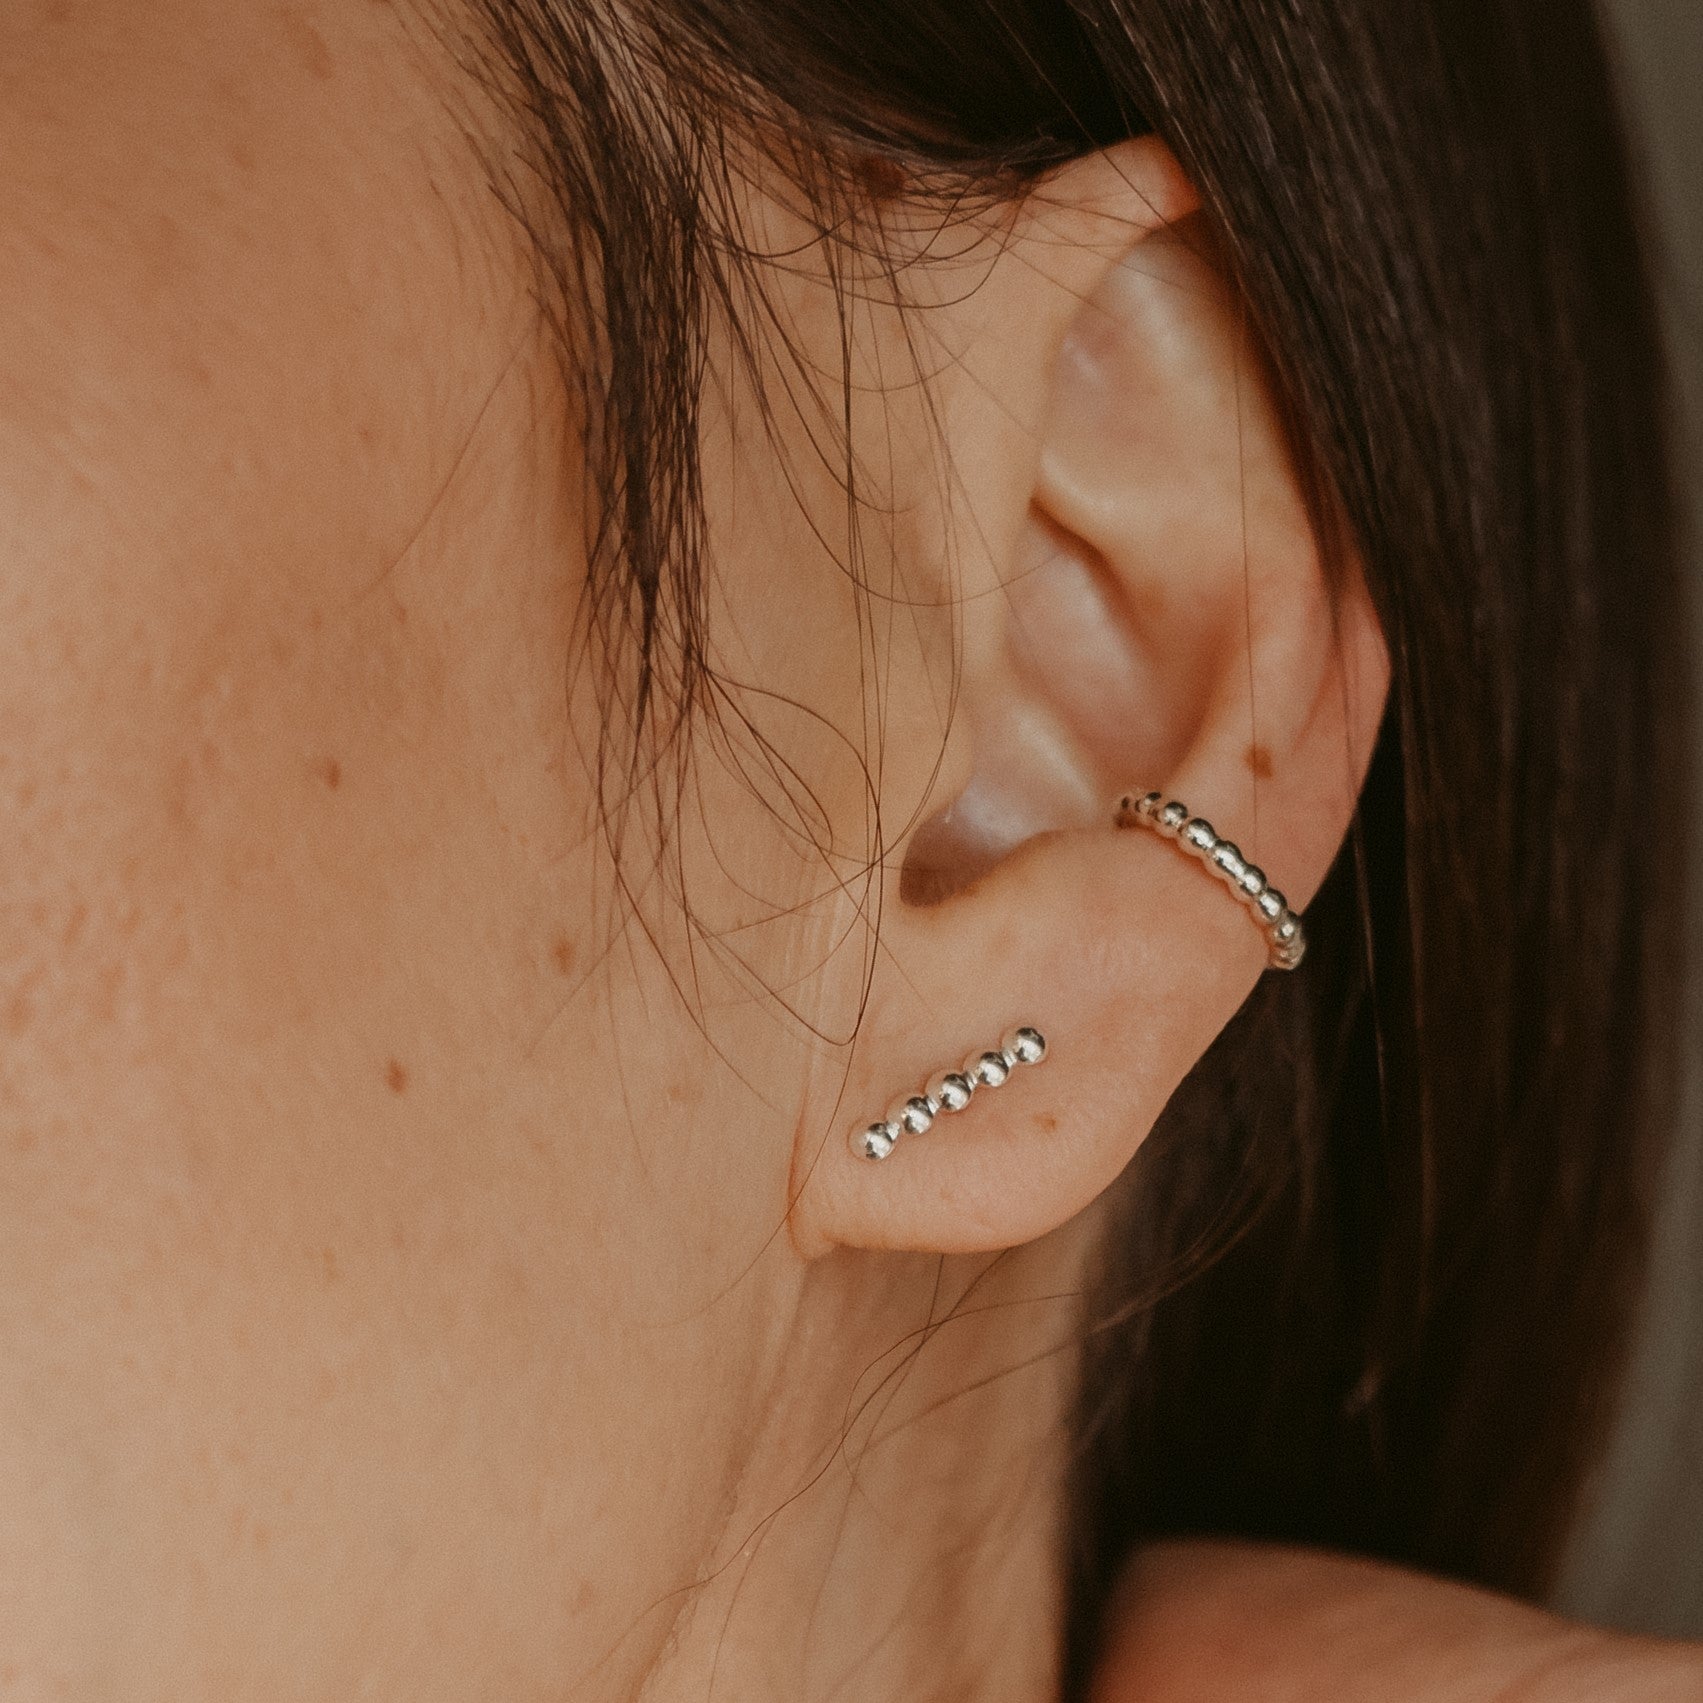 Silver Ear Cuff - Three Different Style Options to Choose From